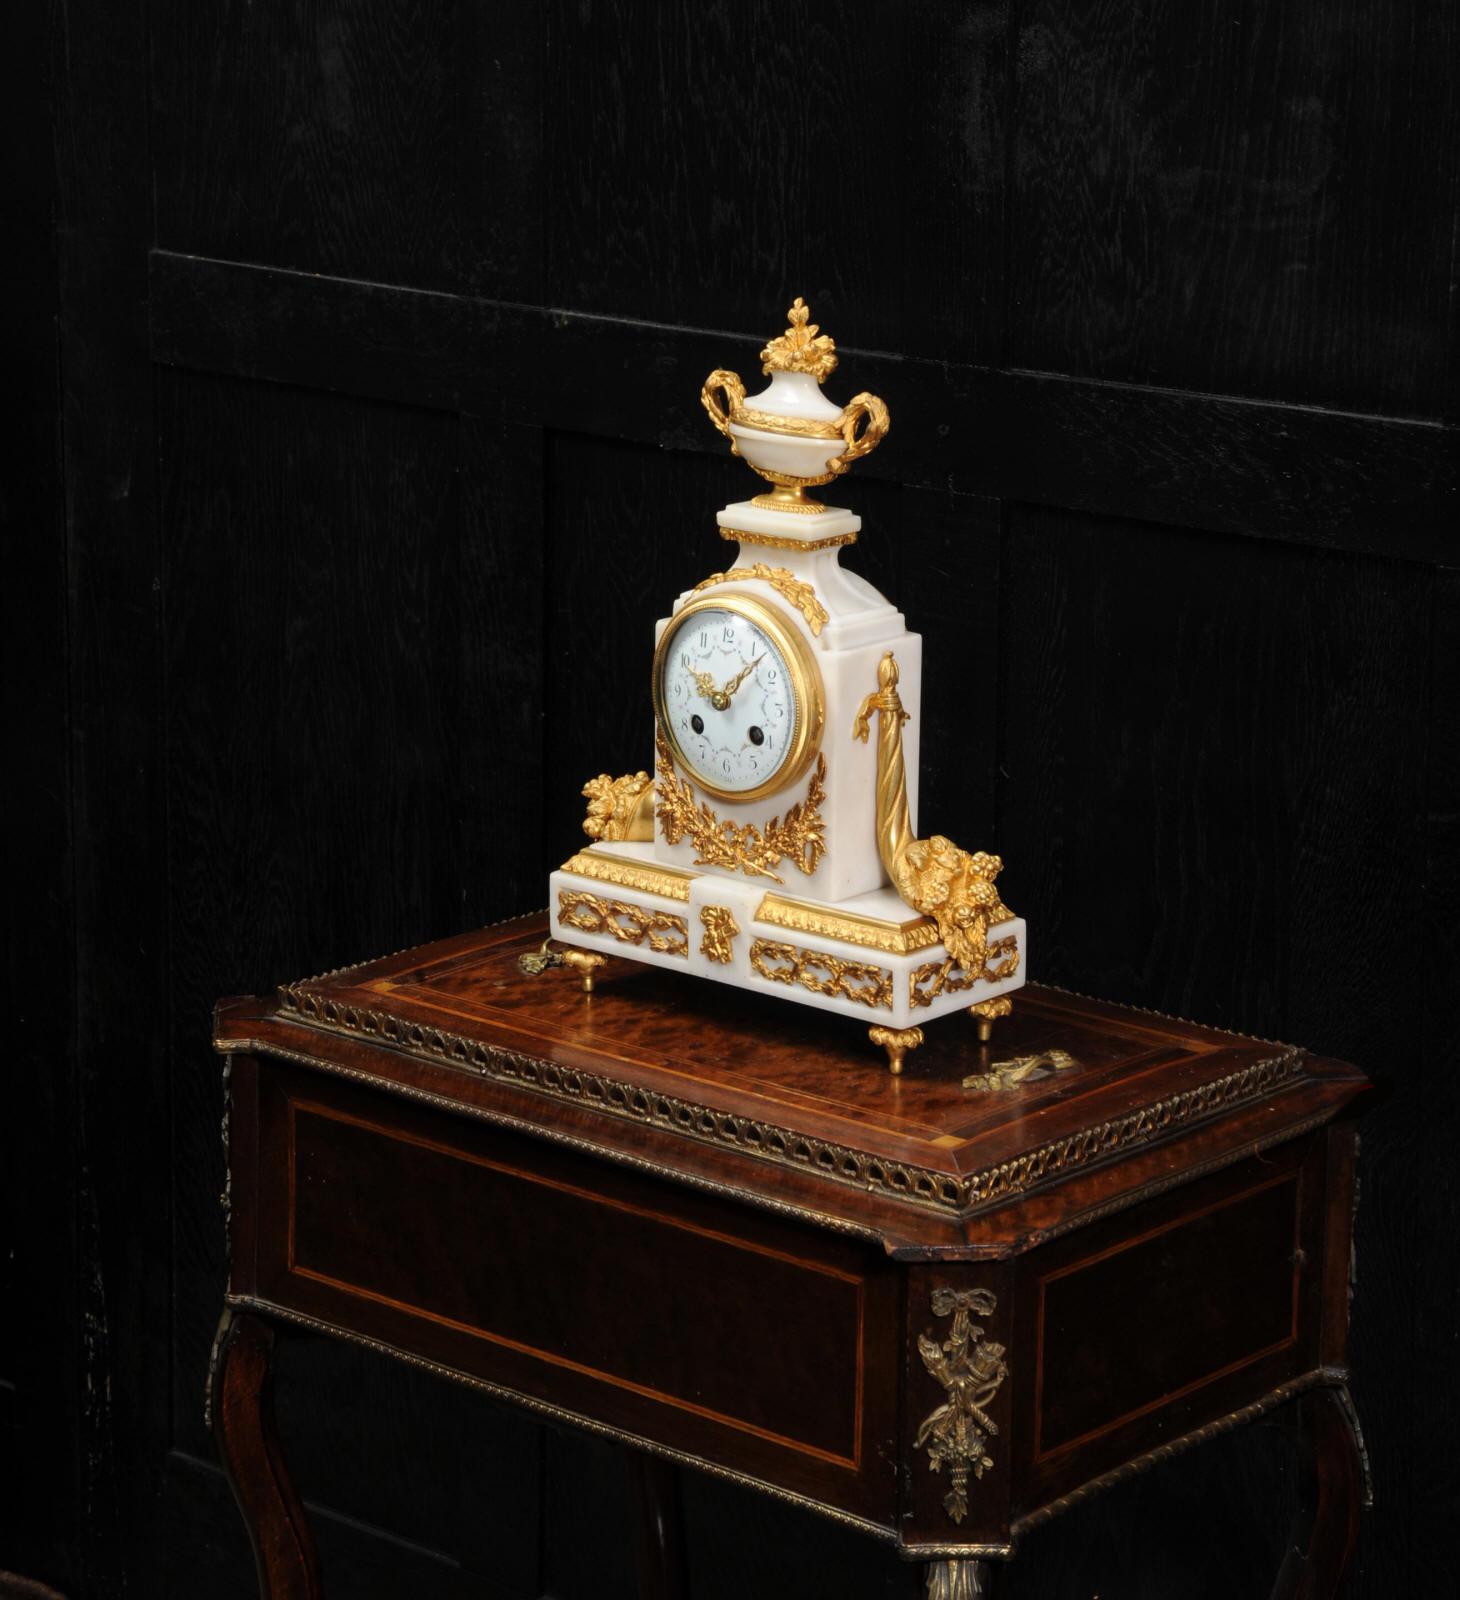 19th Century Antique French White Marble and Ormolu Boudoir Clock